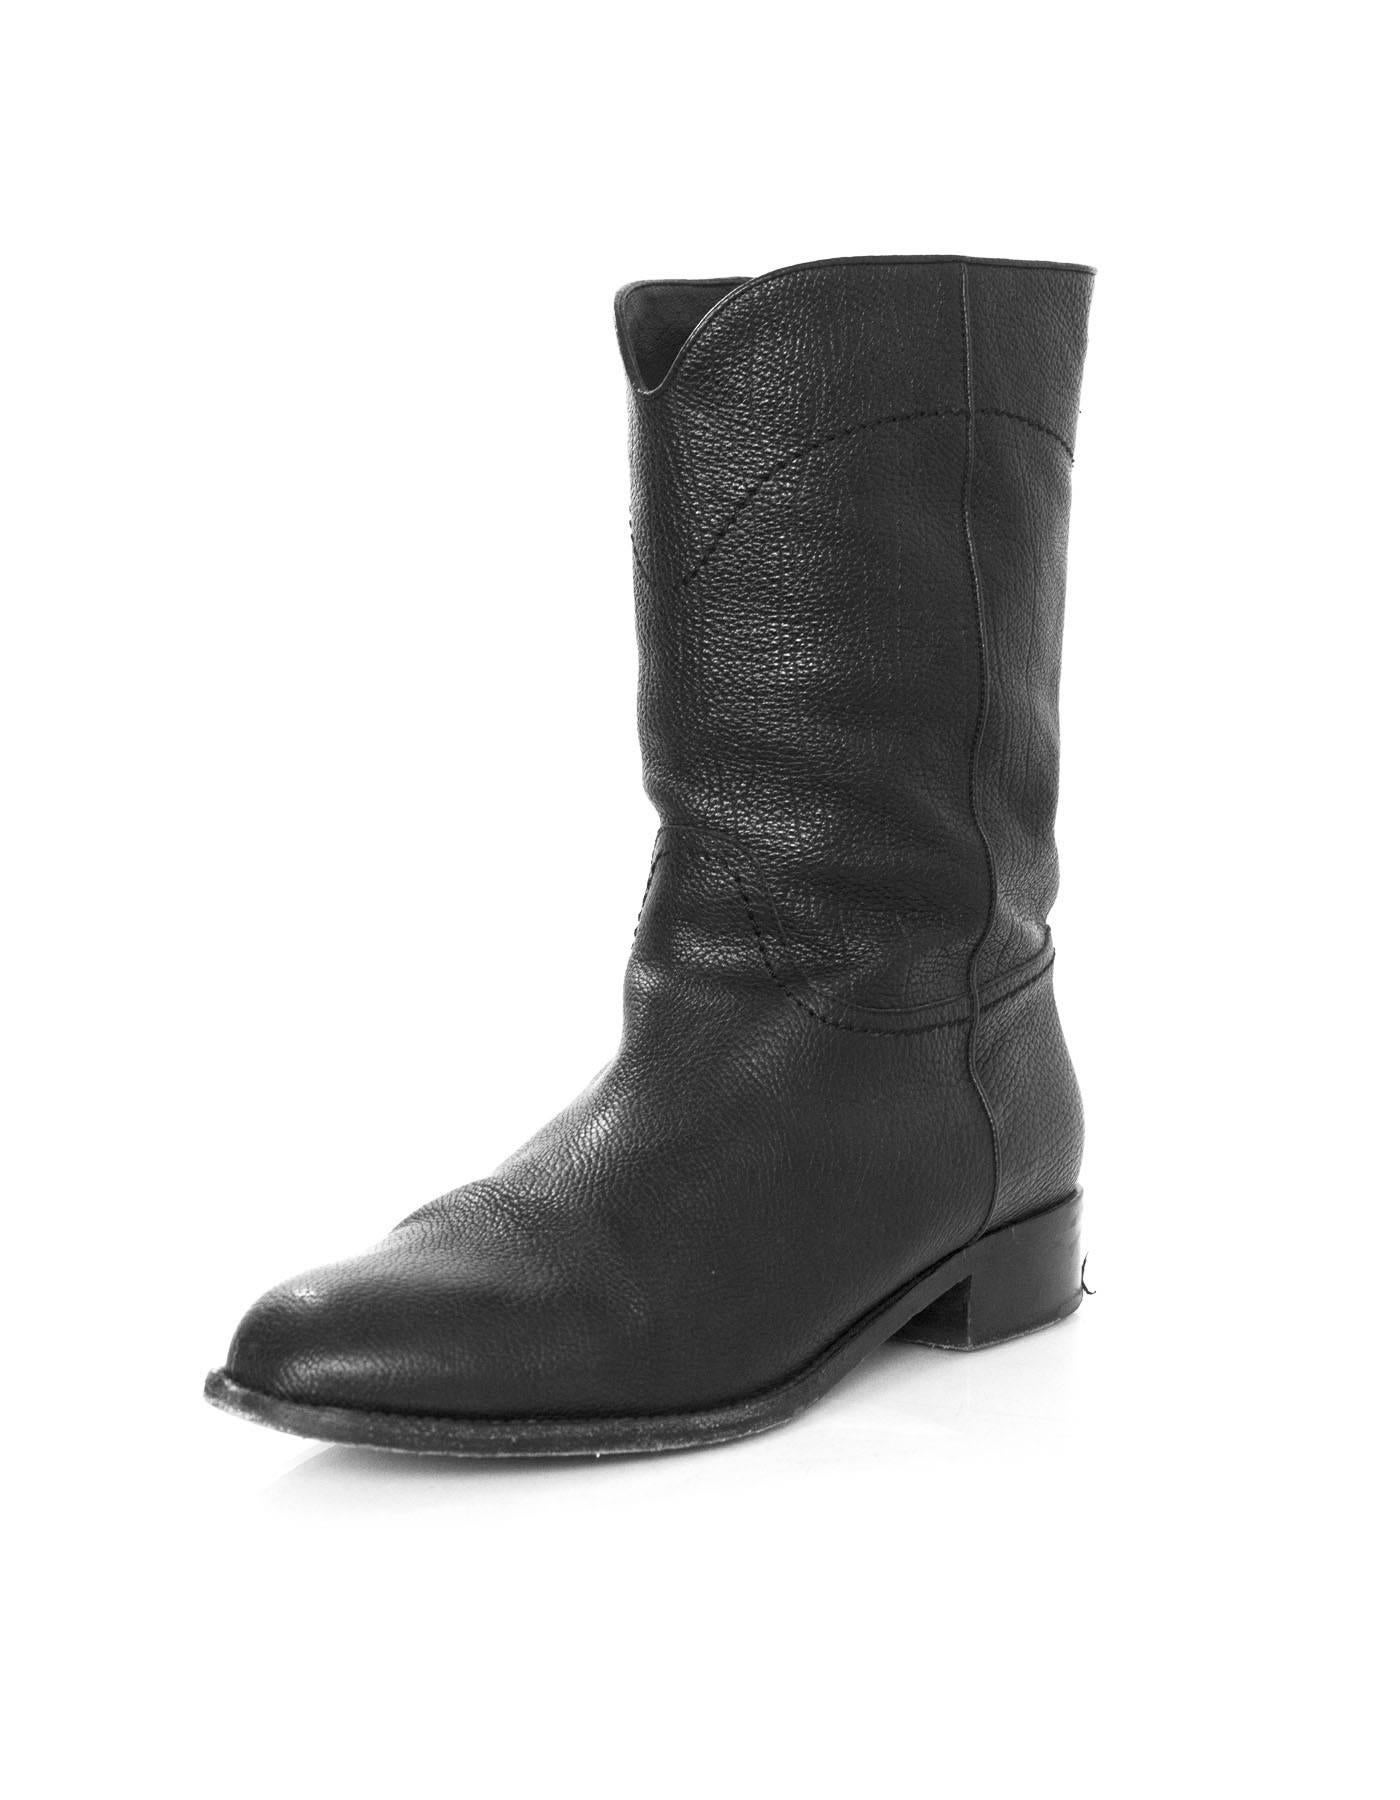 Chanel Black Leather Short Ascot Boots
Features CC stitched on back

Made In: Italy
Color: Black
Materials: Leather
Closure/Opening: Pull on
Sole Stamp: CC Made in Italy 42
Overall Condition: Excellent pre-owned condition with the exception of some